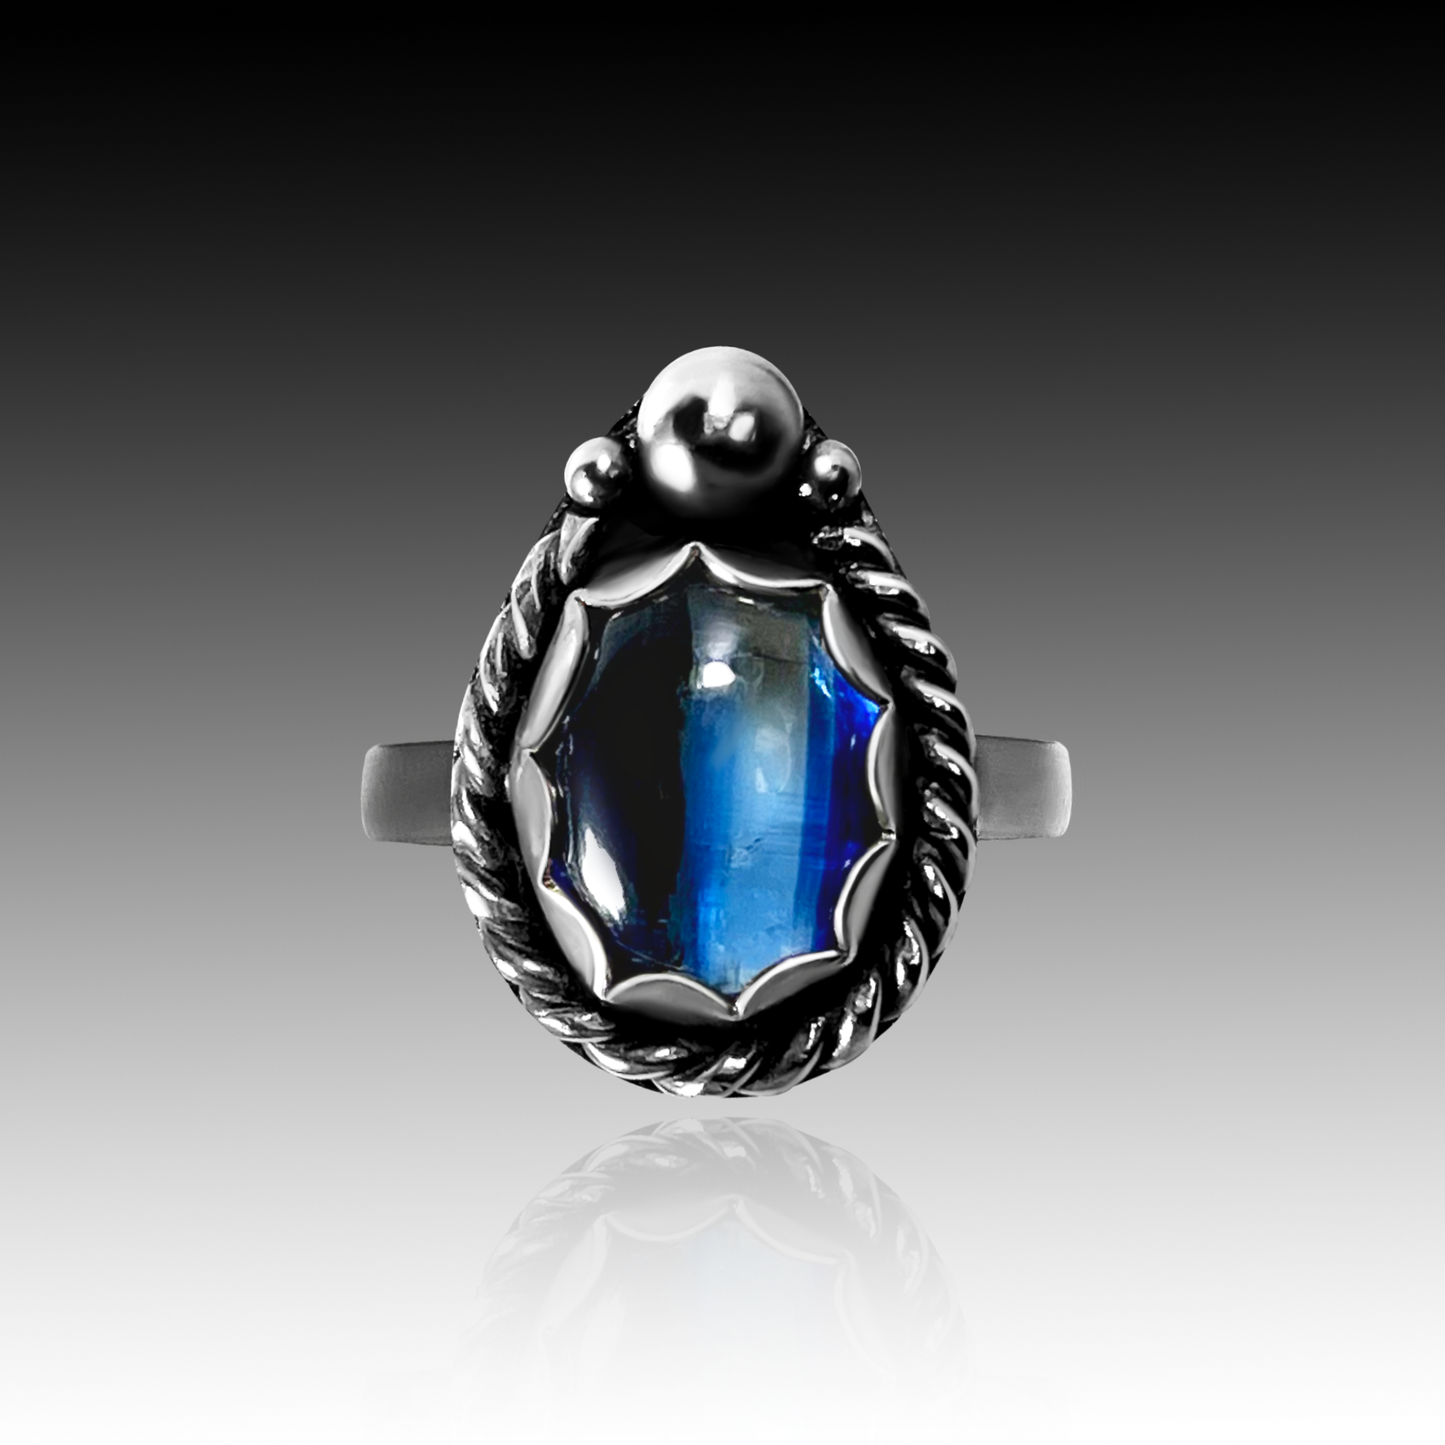 "Pthalo" Handmade Kyanite and Sterling Silver Ring